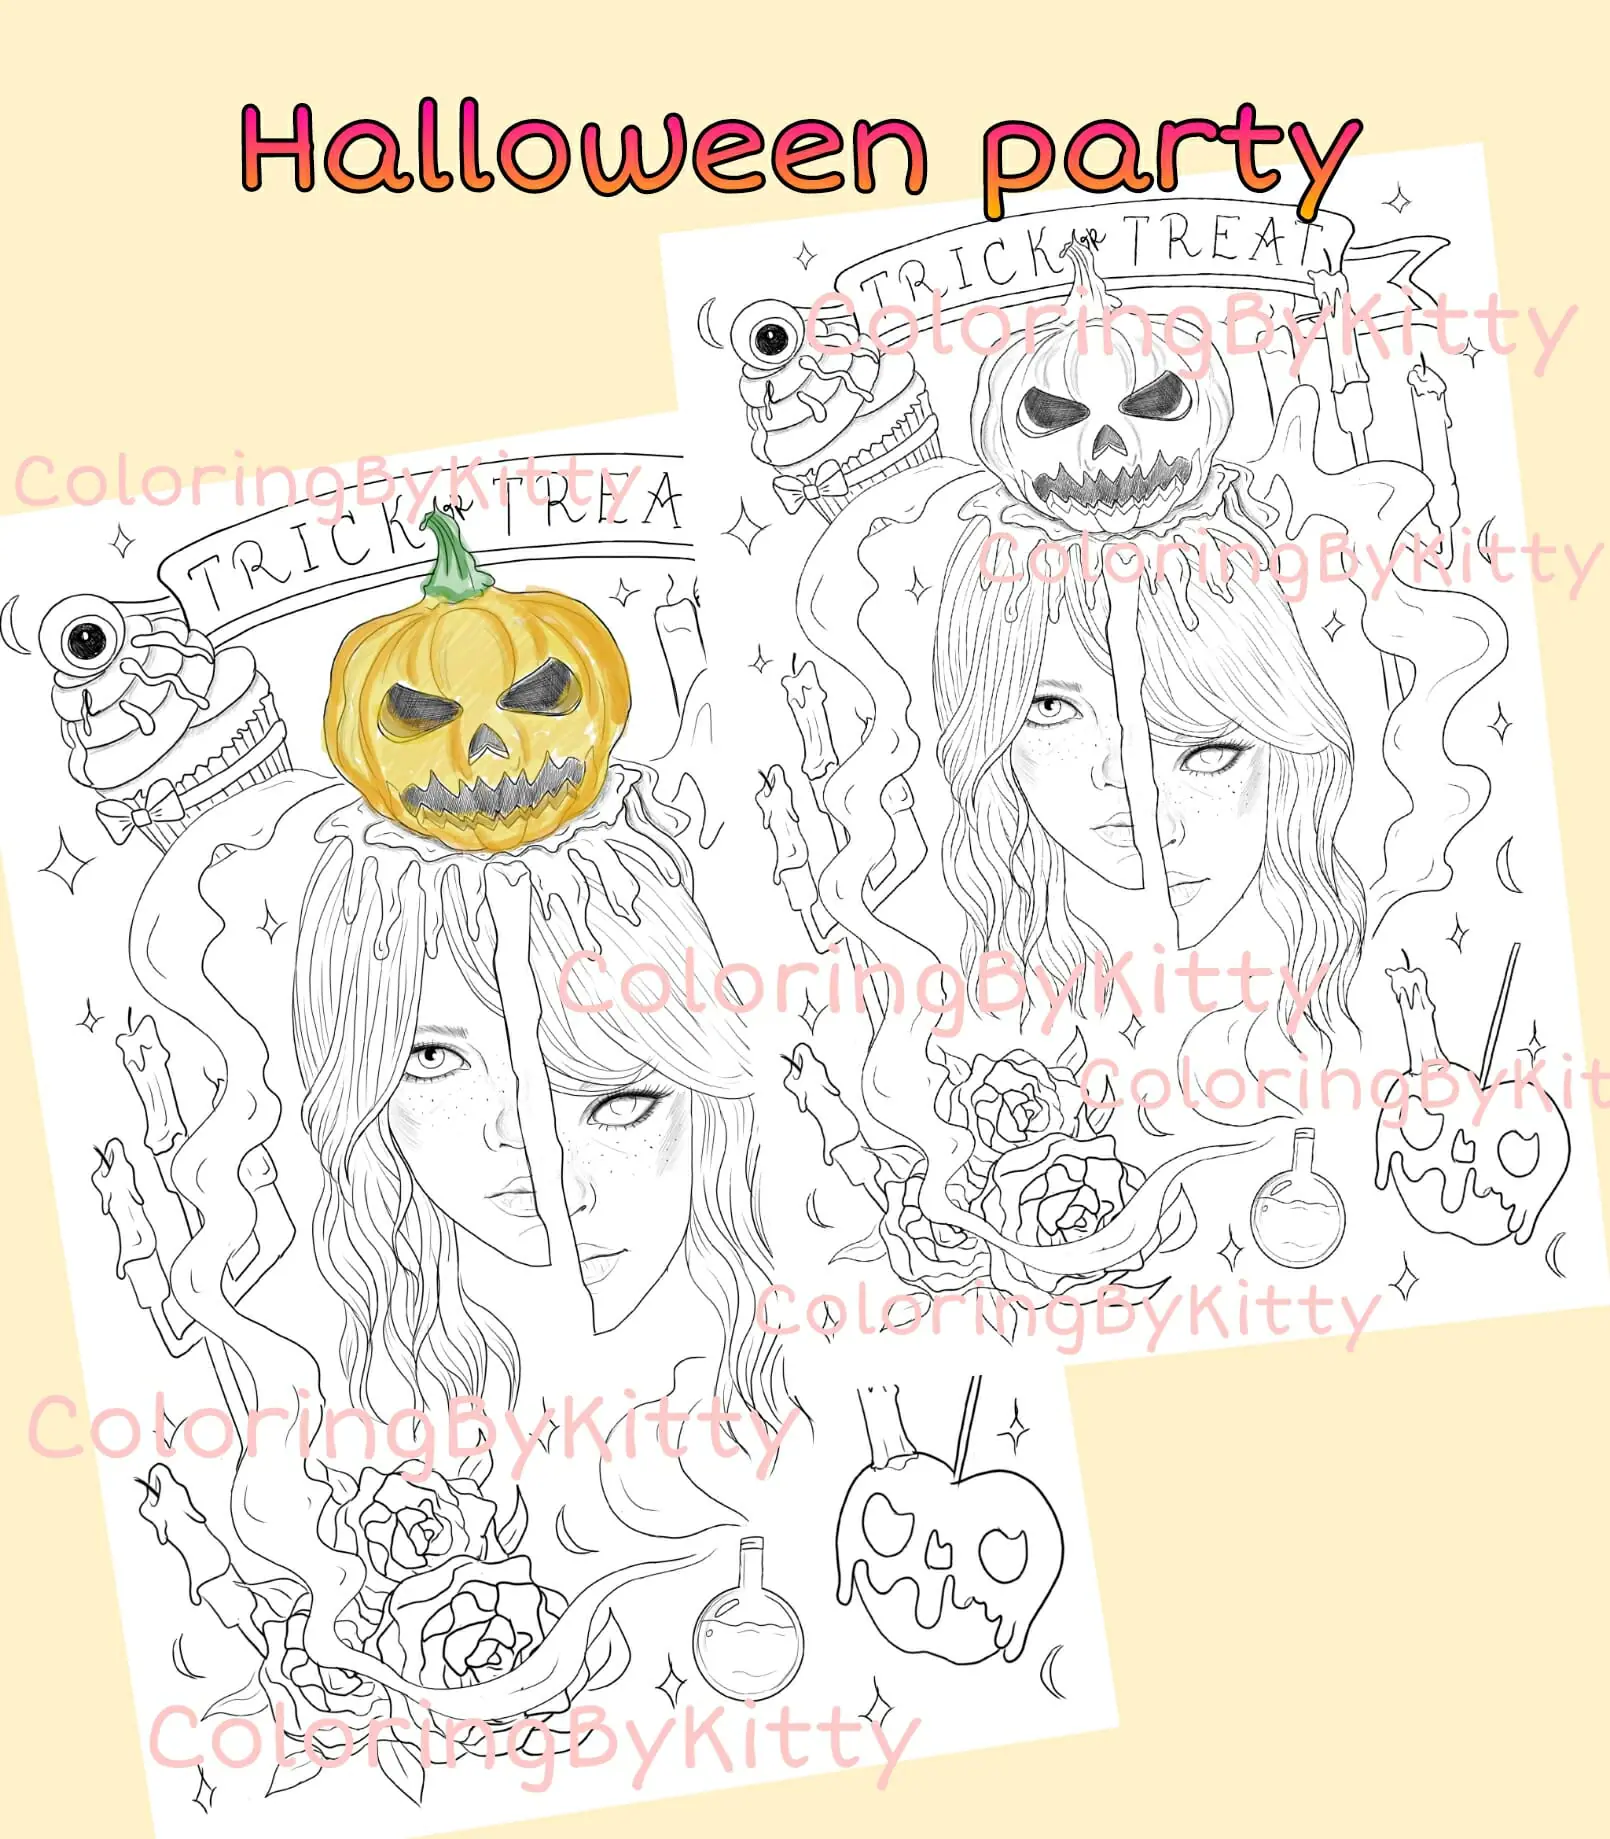 Single coloring page “Halloween party”